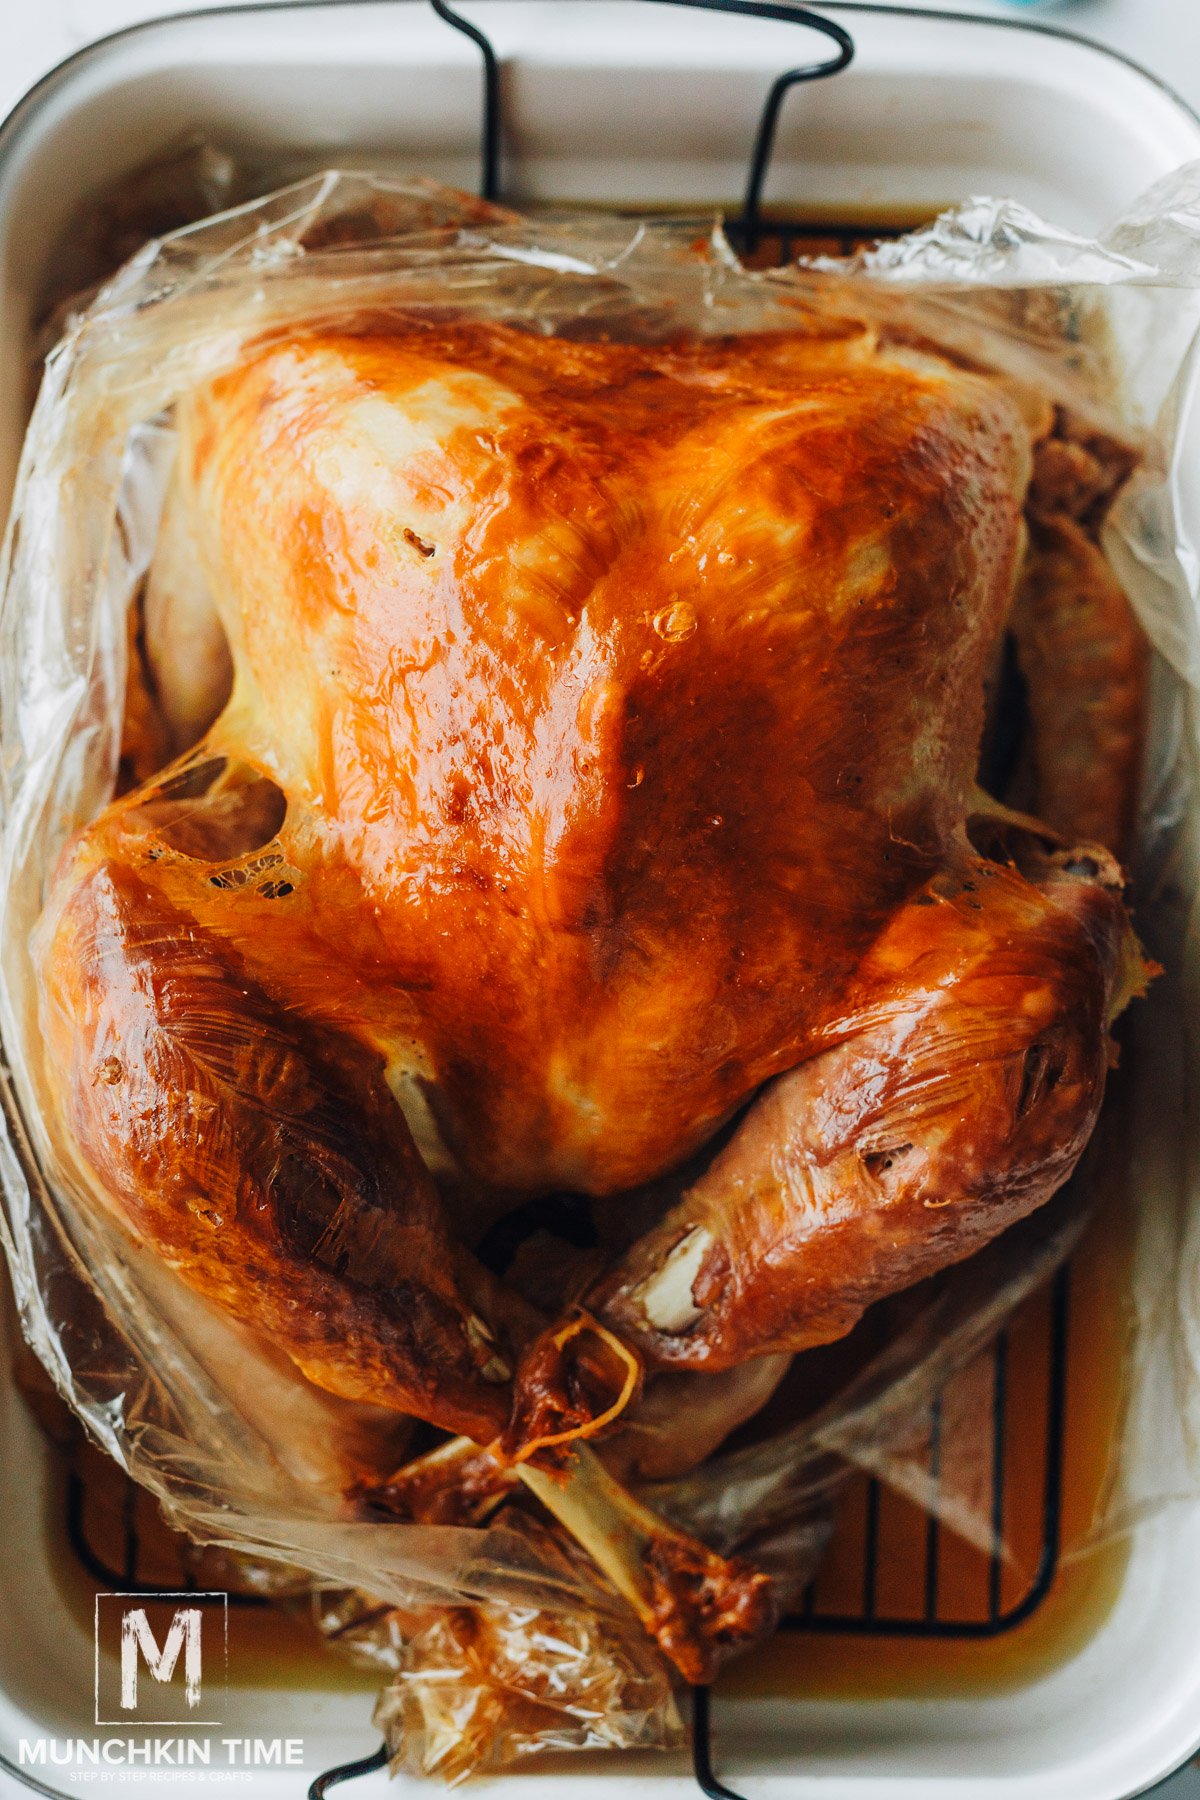 https://www.munchkintime.com/wp-content/uploads/2022/11/how-to-cook-a-turkey-in-a-bag-8.jpg